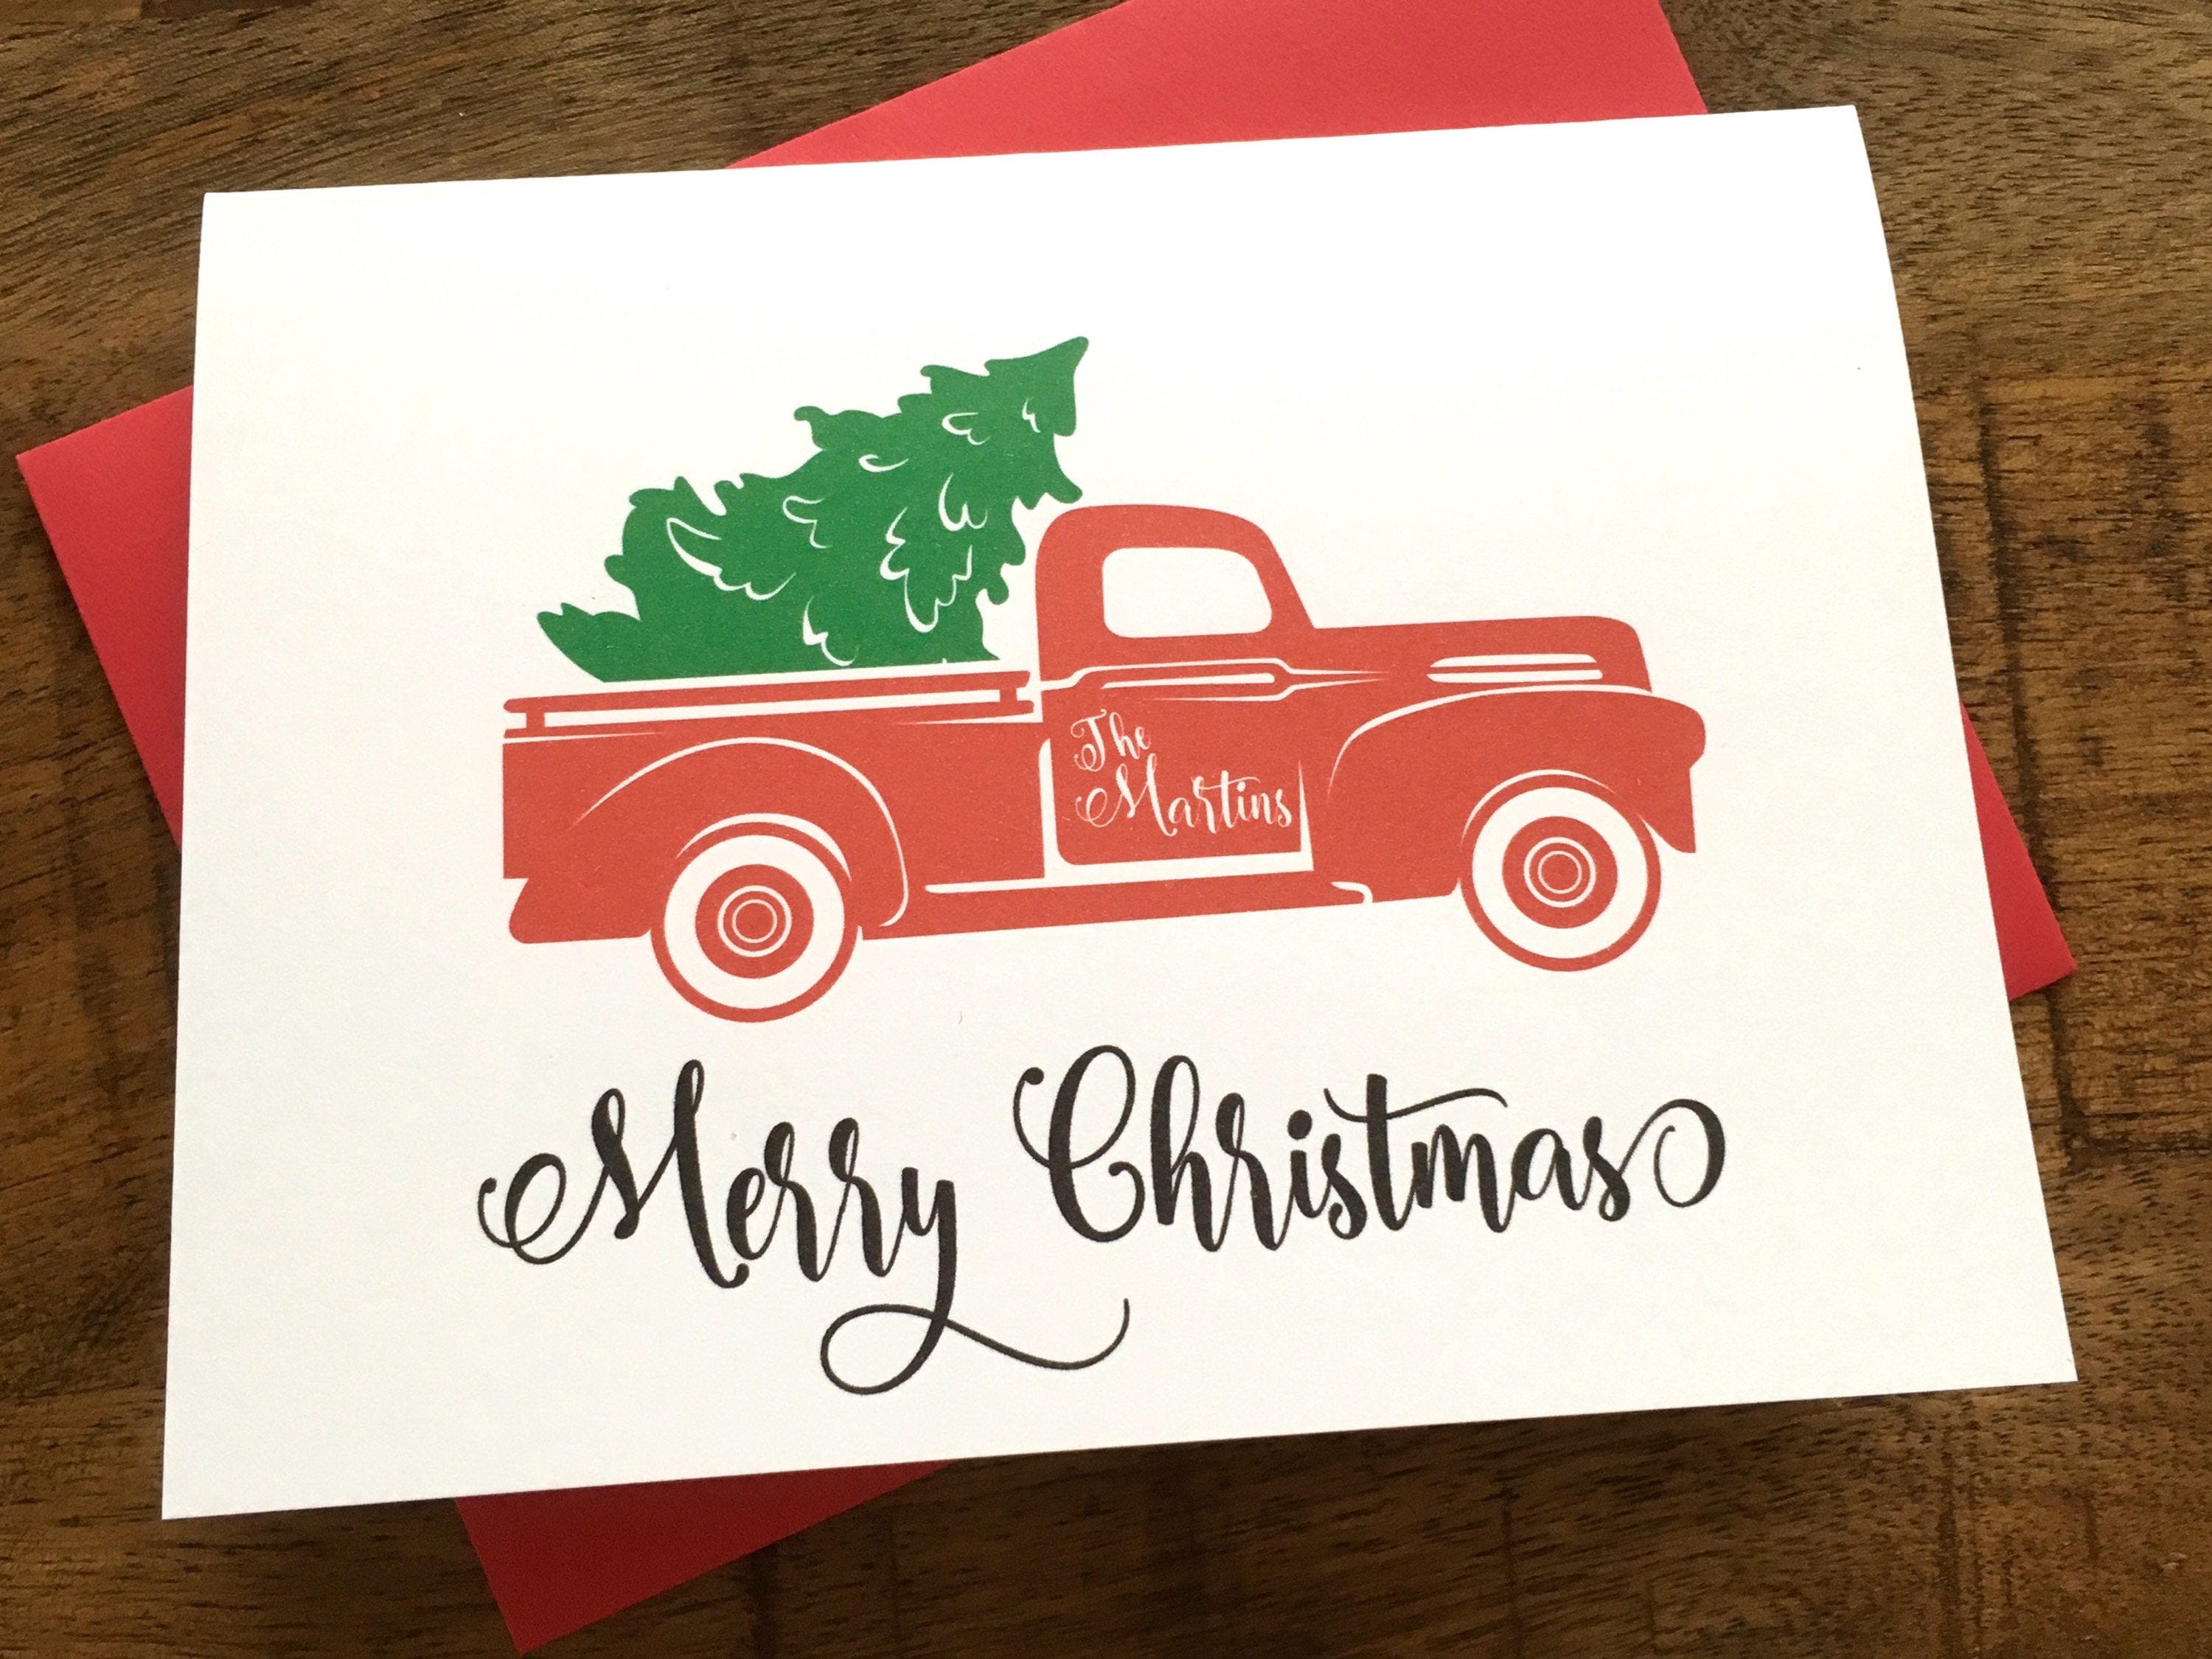 Personalized Christmas Cards - Red Truck and Christmas Tree Cards - Holiday Cards - Seasons Greetings Christmas Card DM720